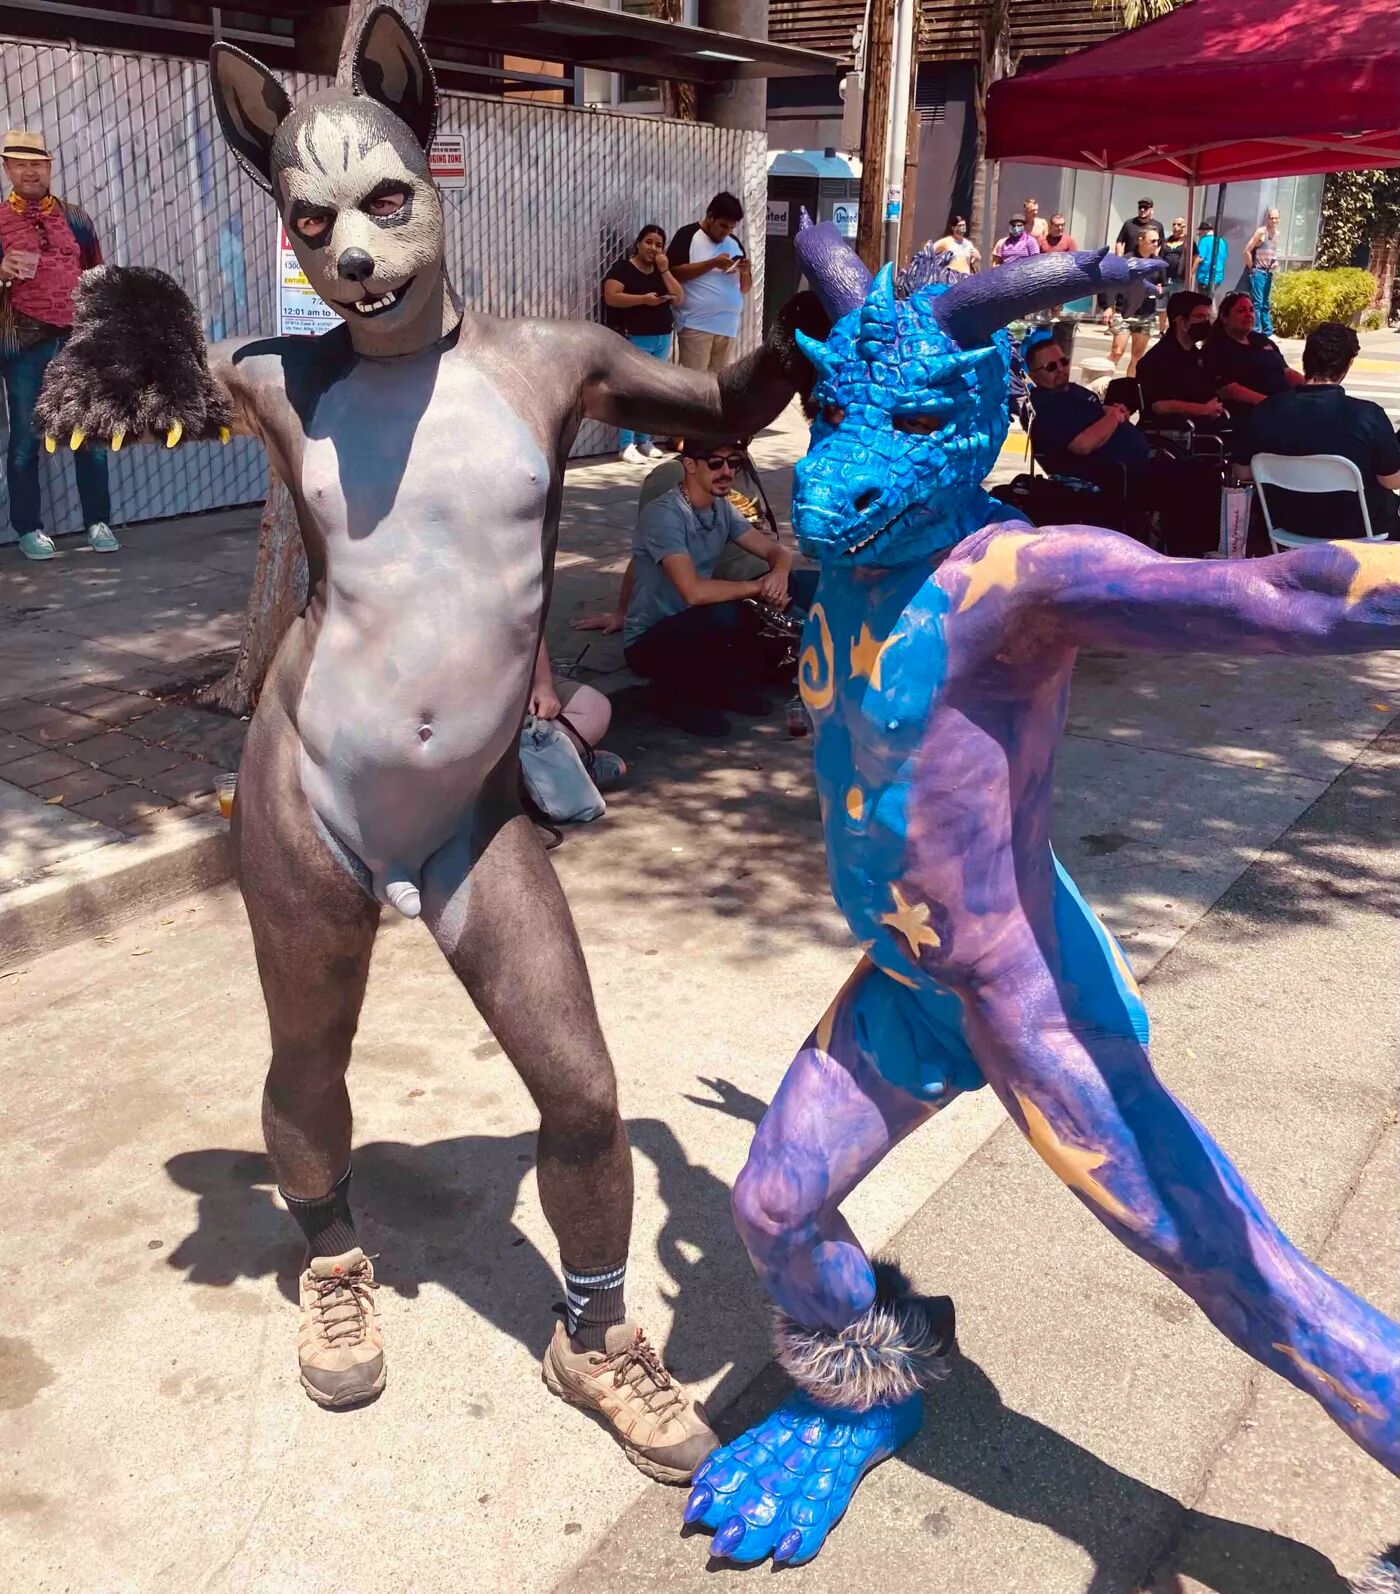 Two people wearing animal masks and full body paint strike poses in the street